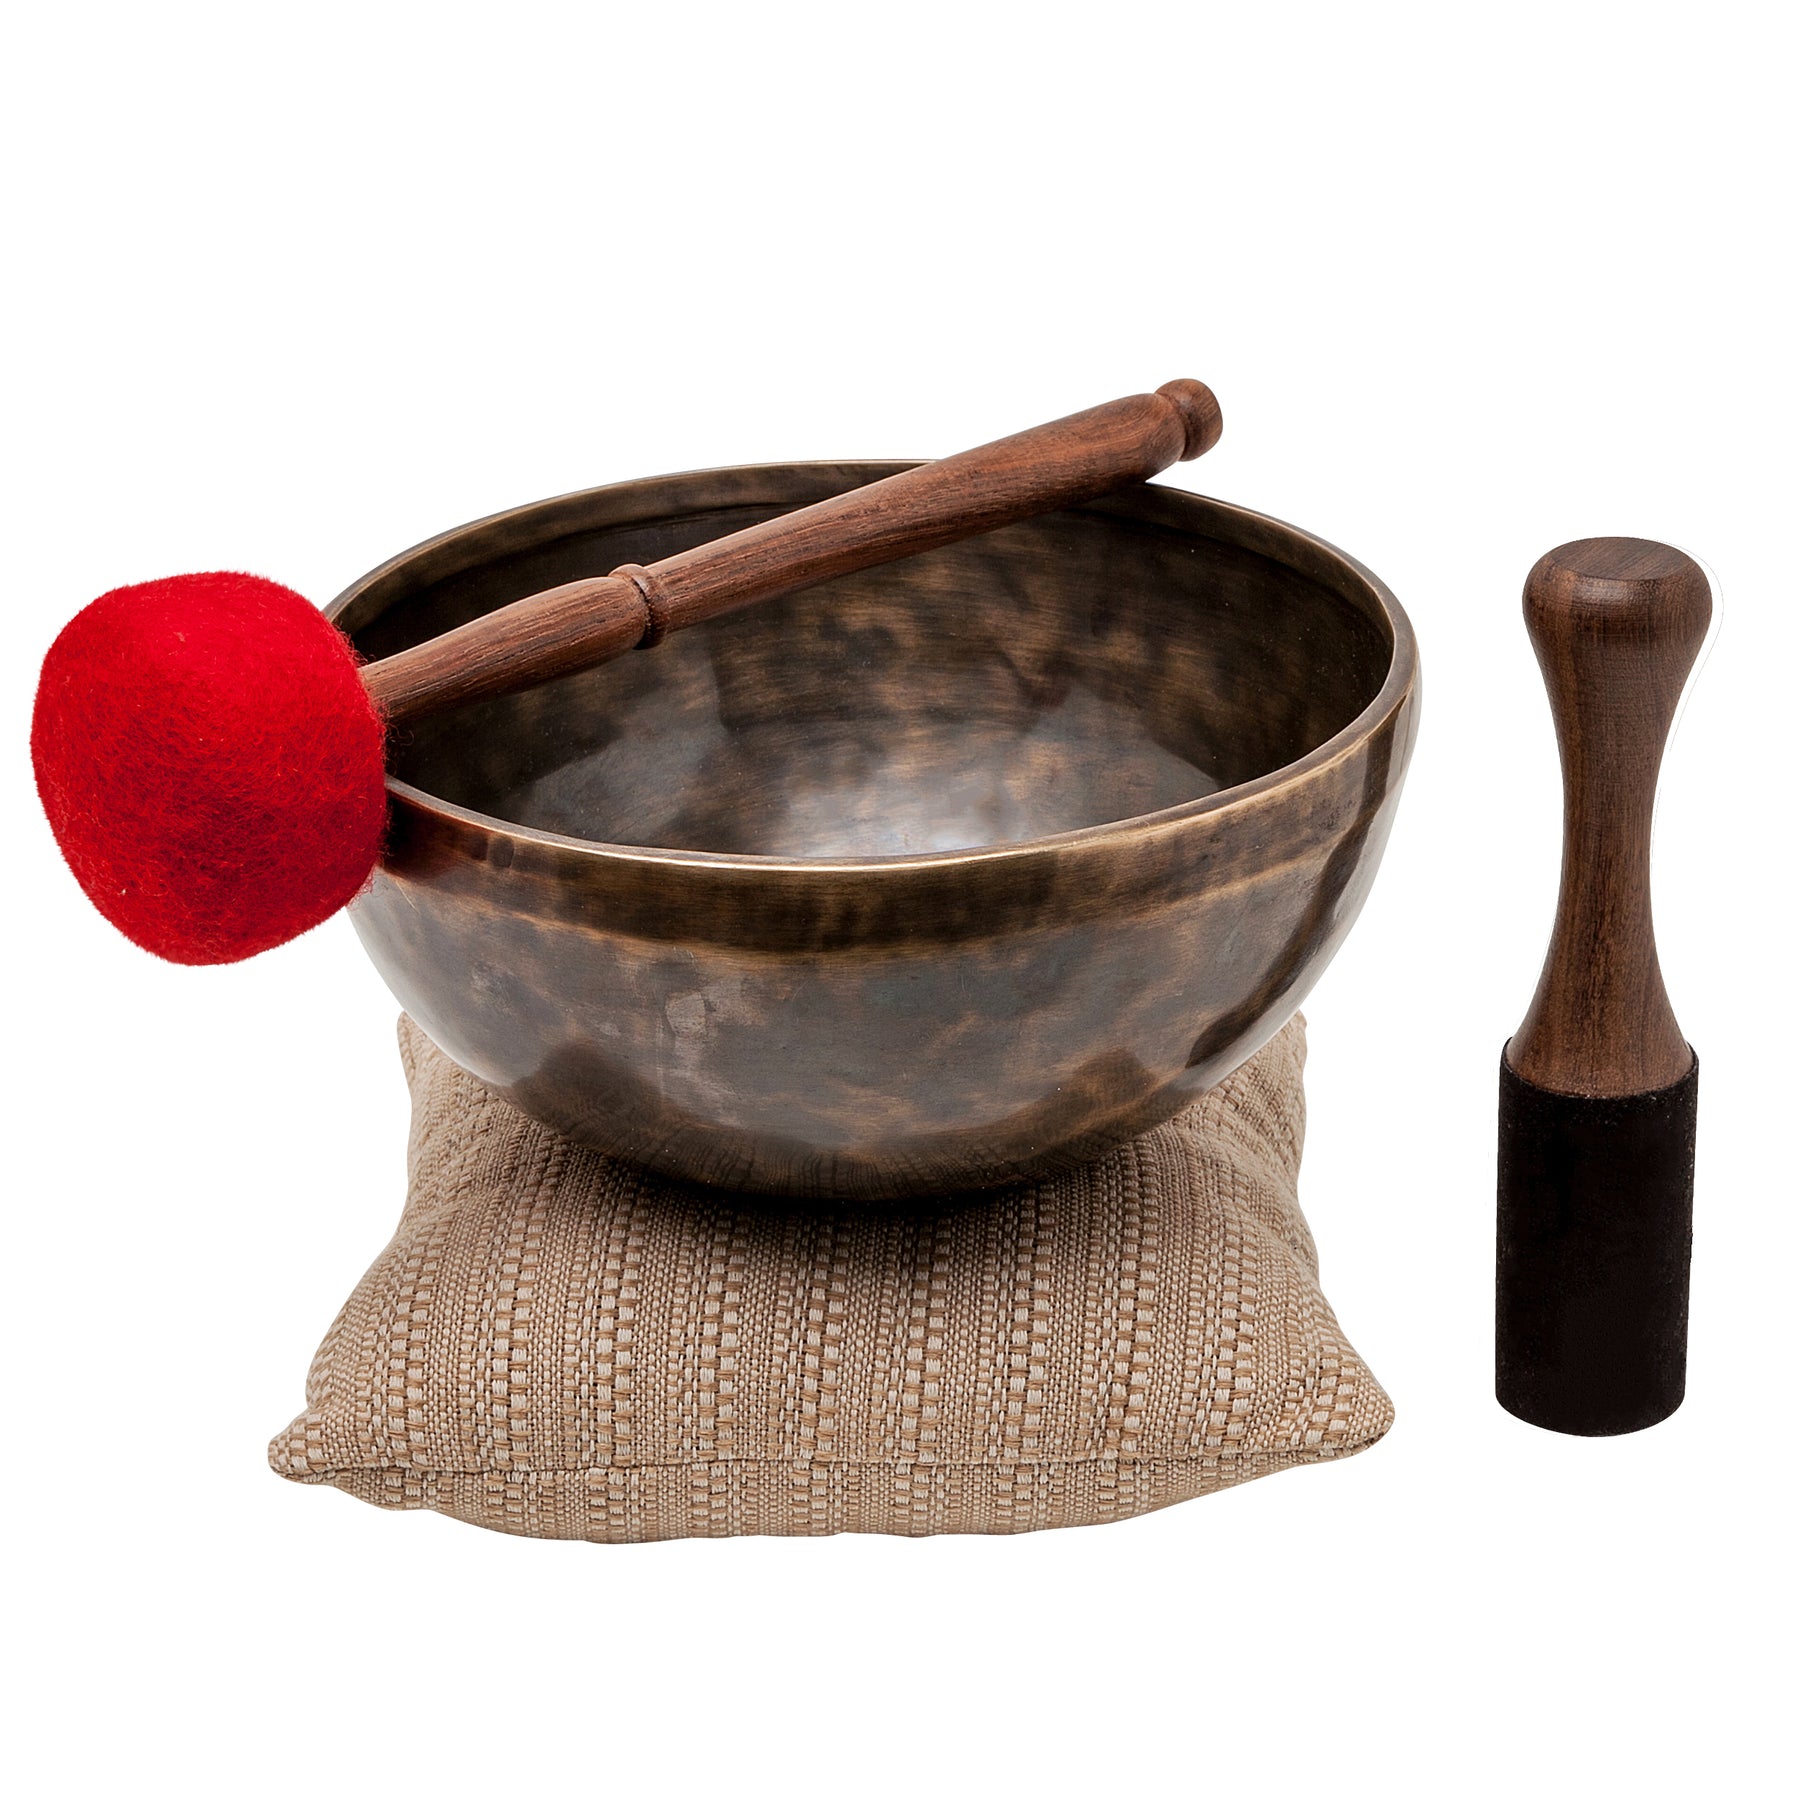 The Galaxy Bundle: Curated Set Of 4 Handmade Singing Bowls From Nepal (14 inch, 12 inch, 9 inch 6 inch)